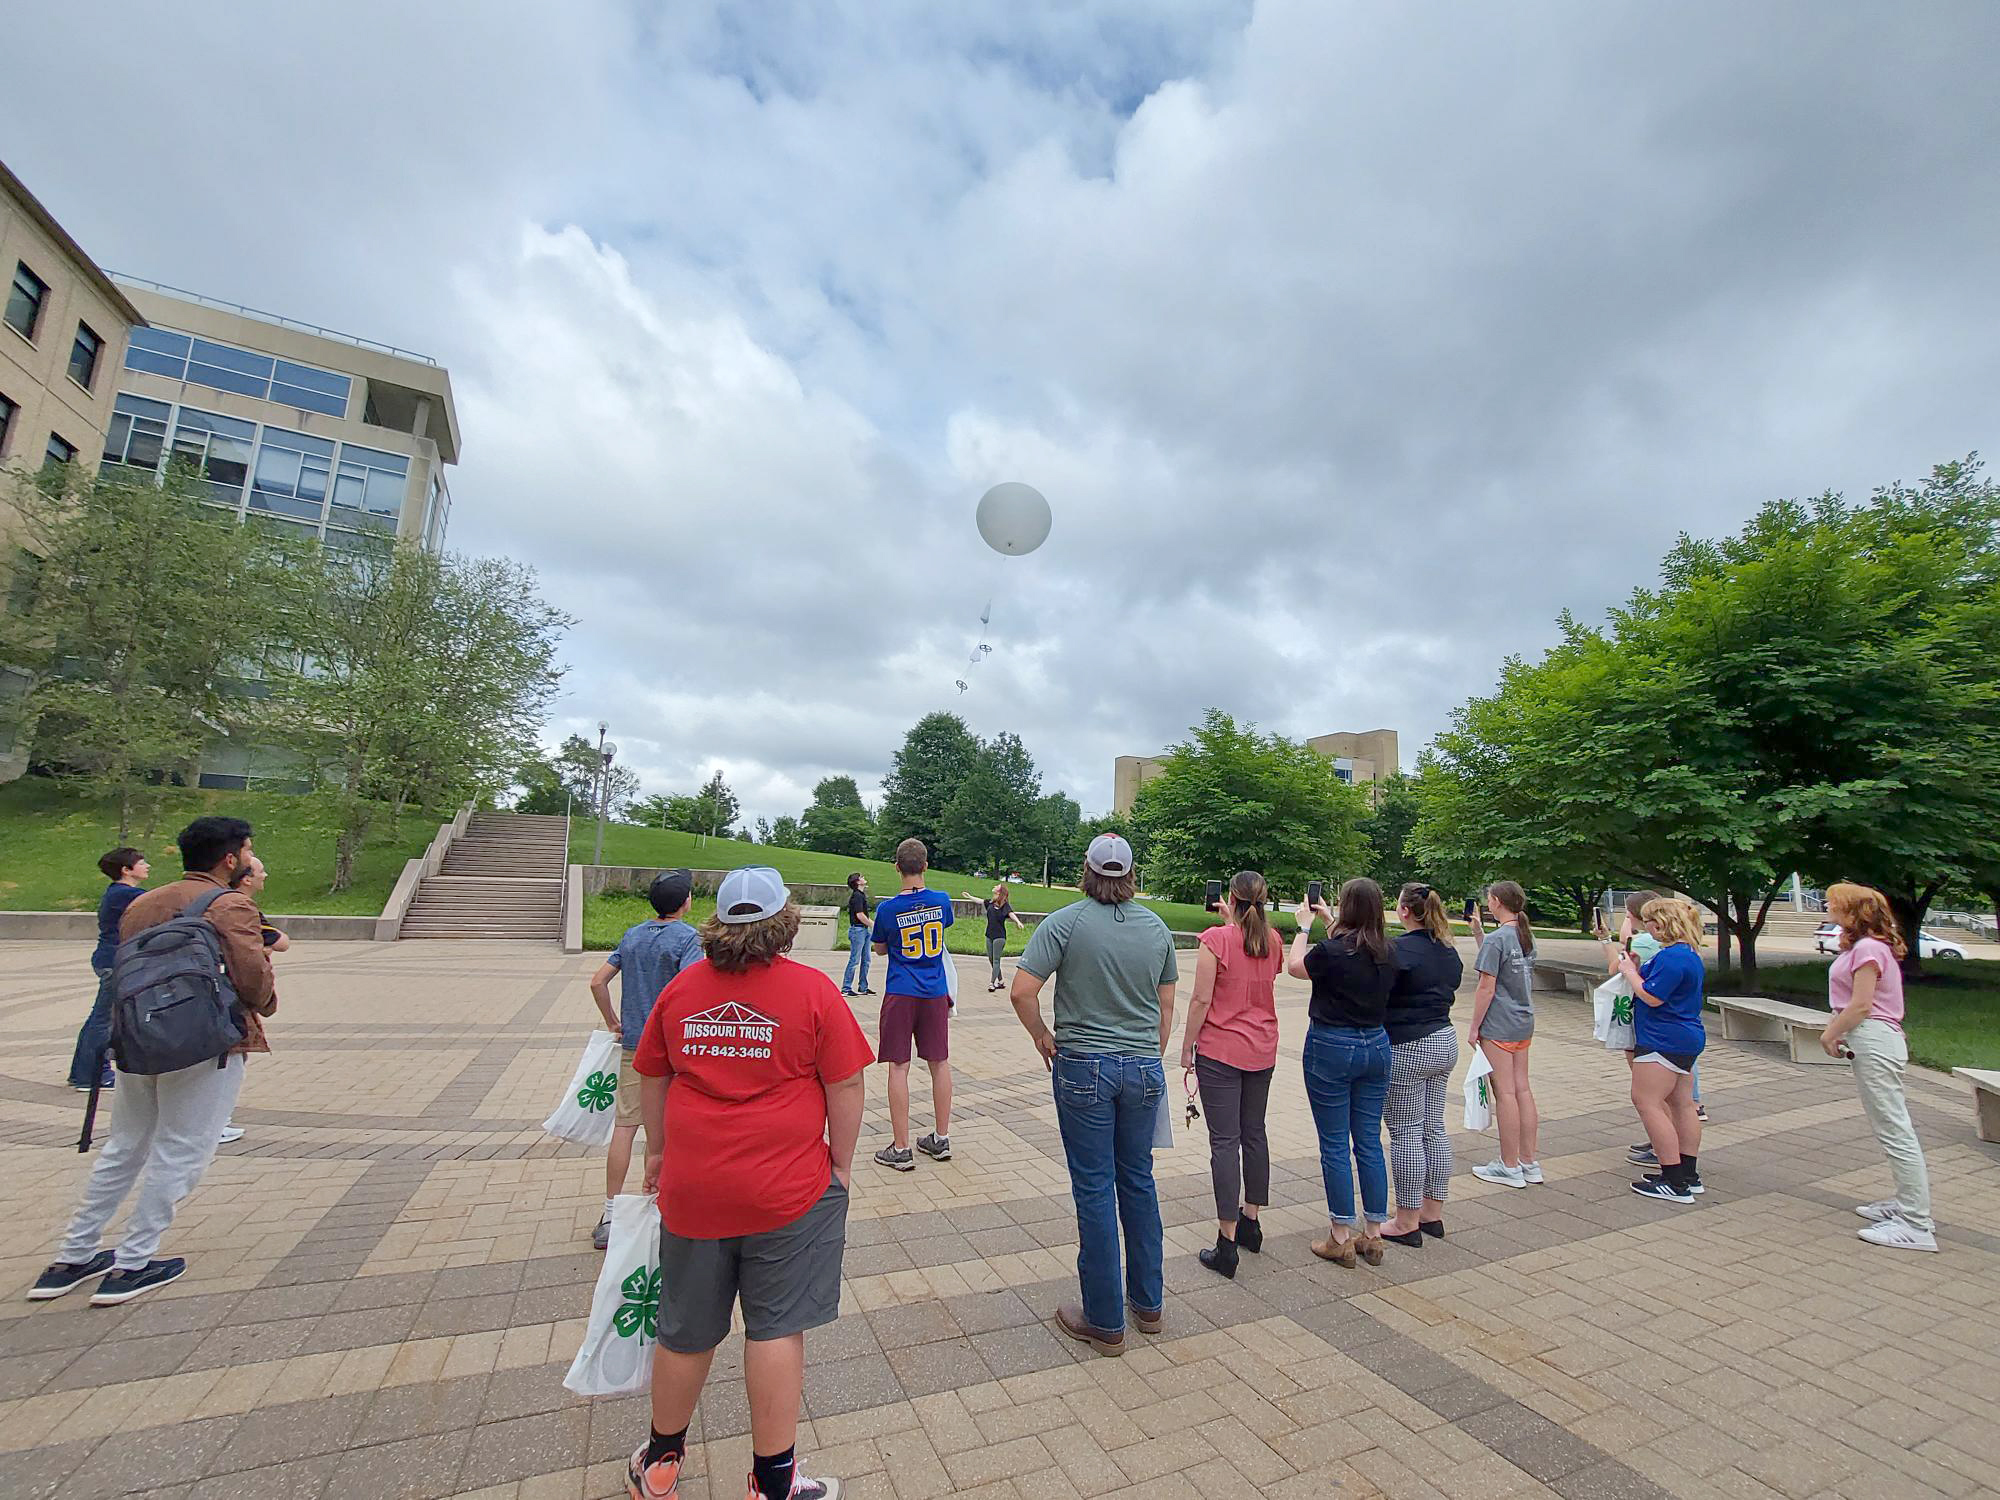 Youths launch a weather balloon with faculty and staff from the MU College of Agriculture, Food and Natural Resources’ Environmental Sciences program.